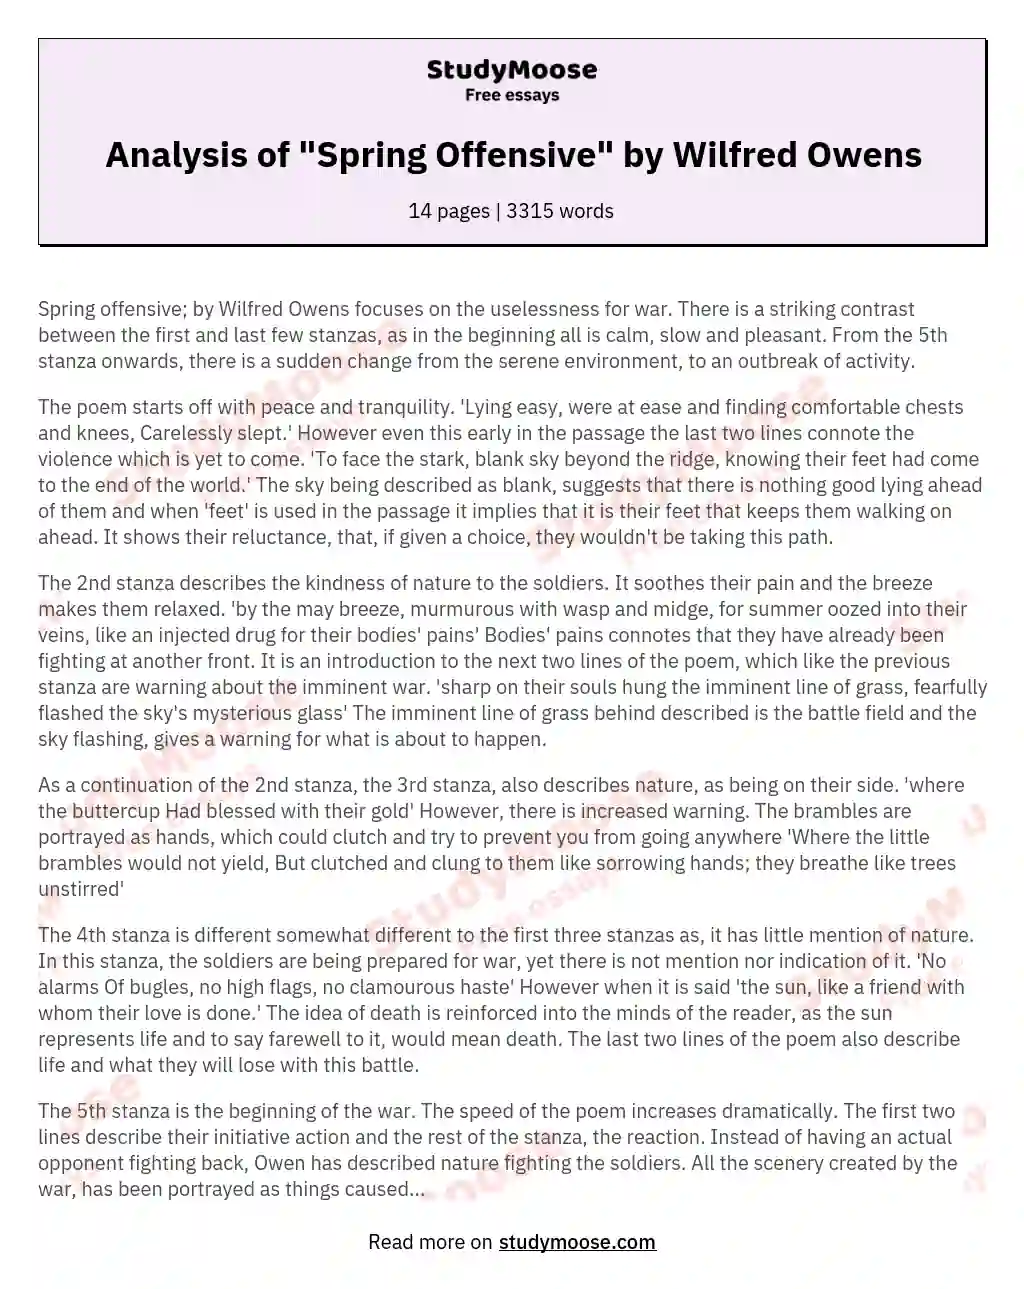 Analysis of "Spring Offensive" by Wilfred Owens